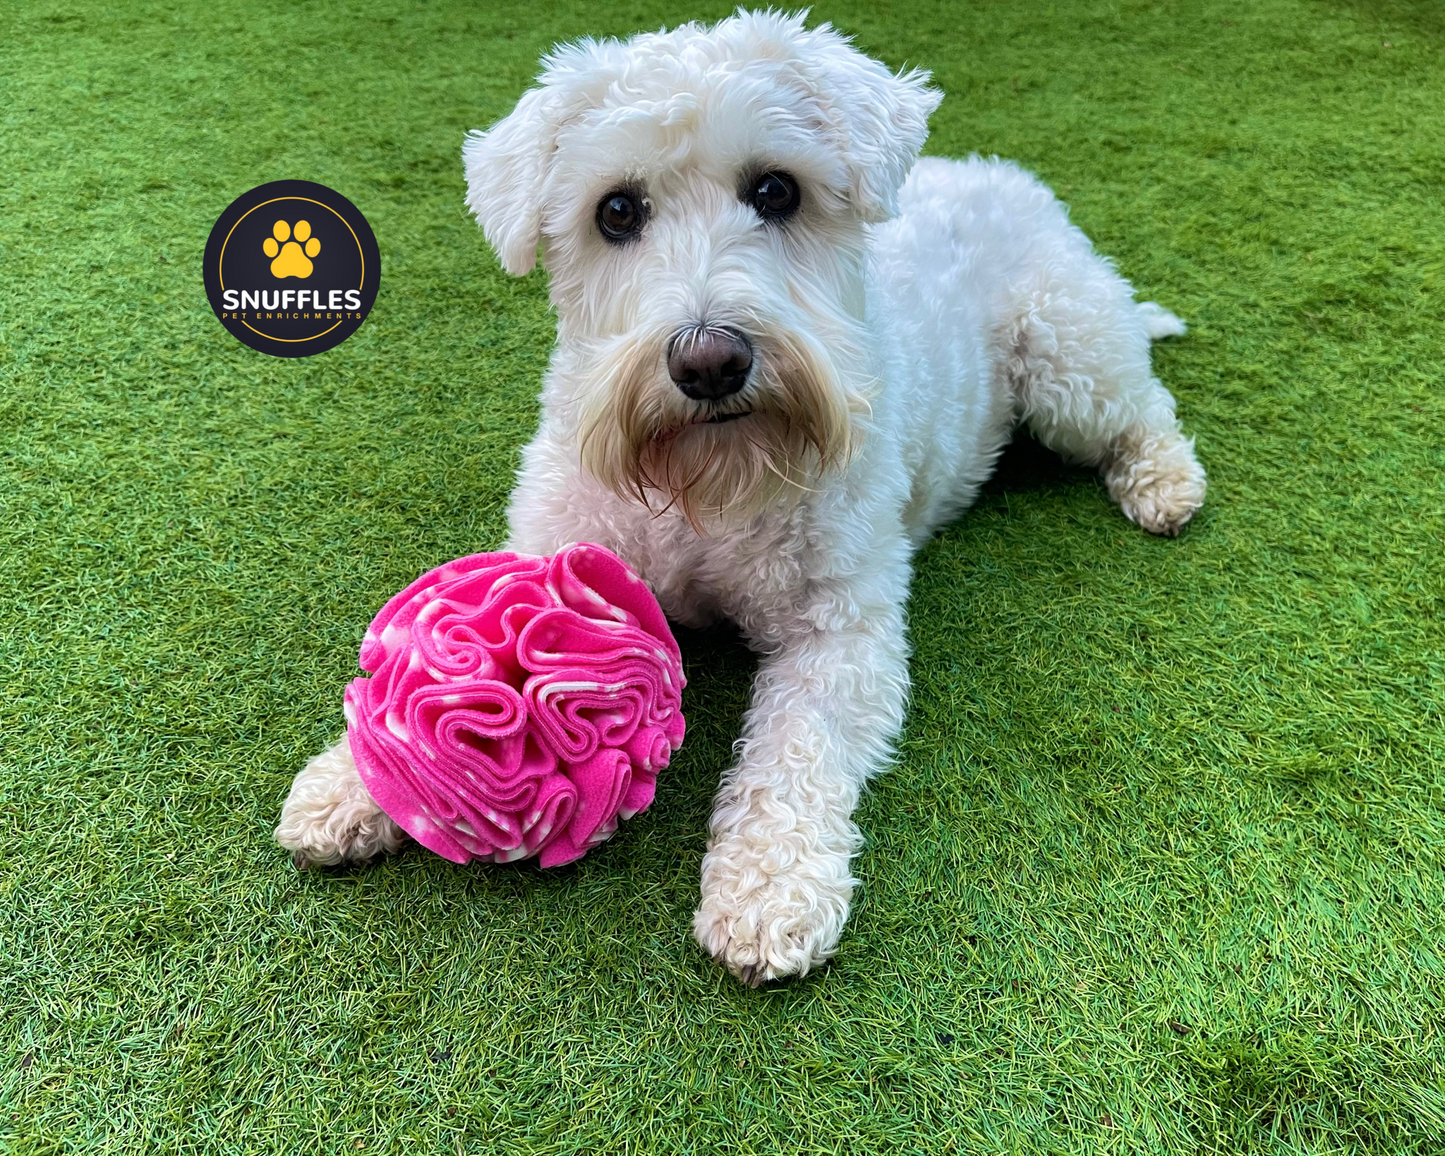 Medium Snuffle Ball For Dogs, 10 Colour Options Available